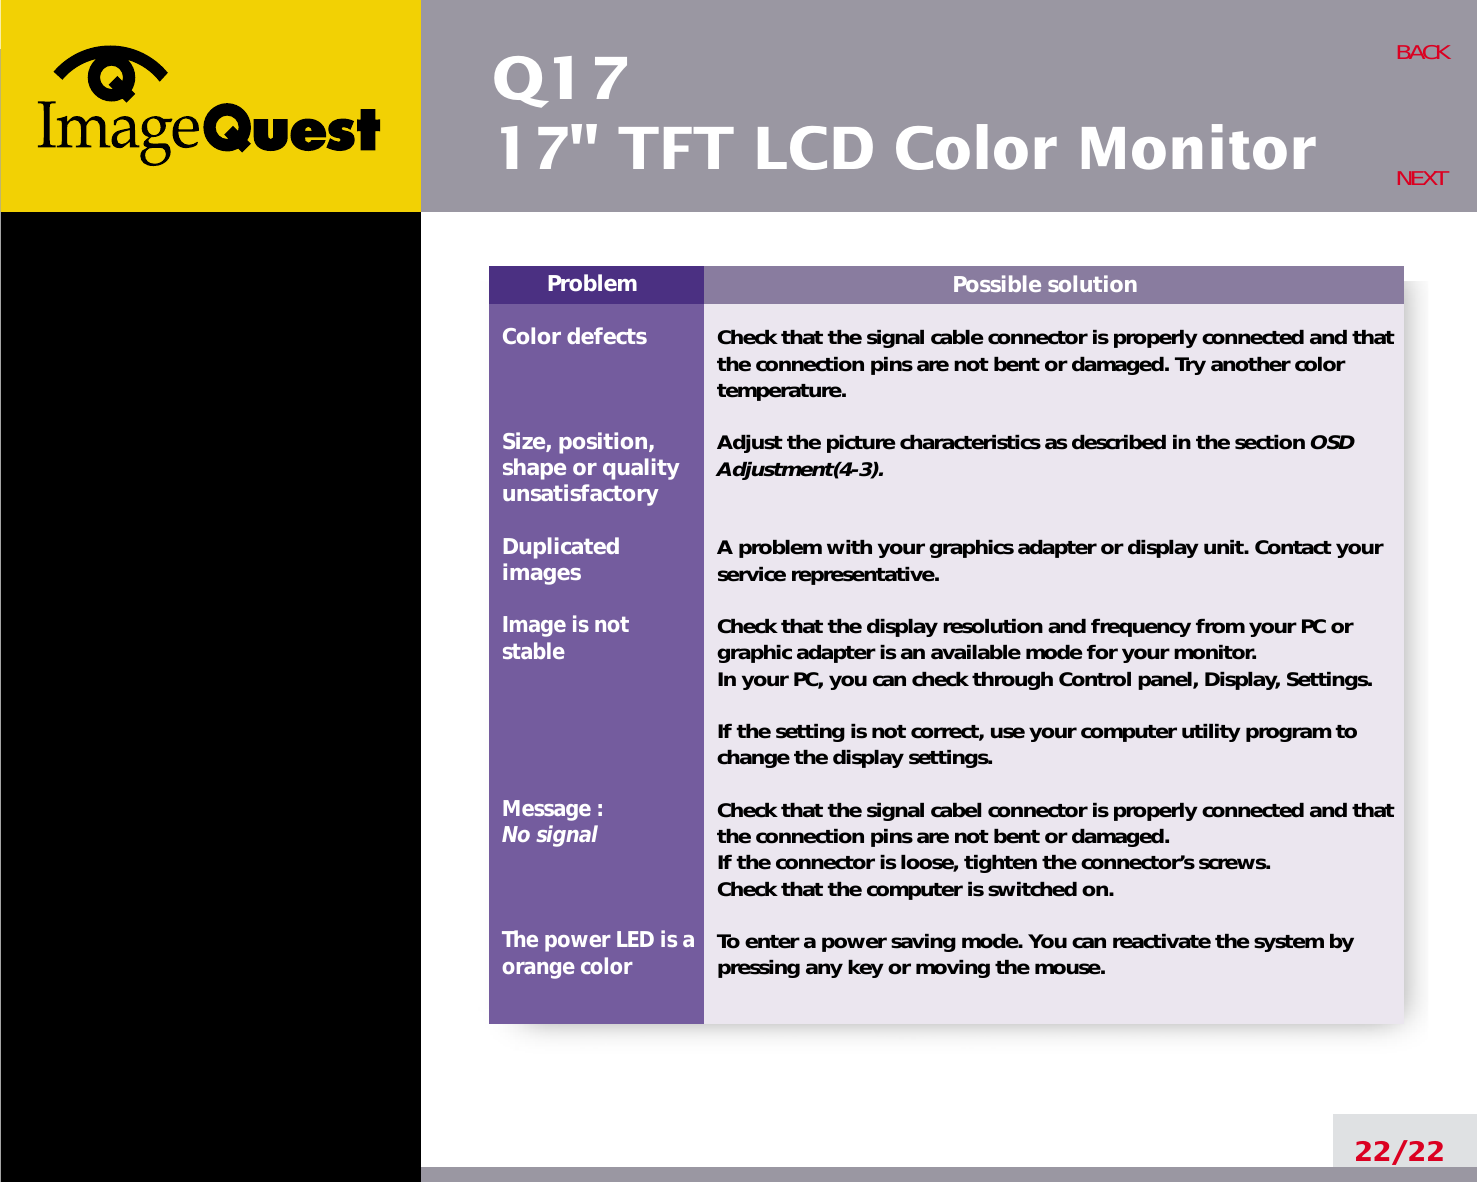 Q1717&quot; TFT LCD Color Monitor22/22BACKNEXTPossible solutionCheck that the signal cable connector is properly connected and thatthe connection pins are not bent or damaged. Try another colortemperature. Adjust the picture characteristics as described in the section OSDAdjustment(4-3).A problem with your graphics adapter or display unit. Contact yourservice representative.Check that the display resolution and frequency from your PC orgraphic adapter is an available mode for your monitor.In your PC, you can check through Control panel, Display, Settings.If the setting is not correct, use your computer utility program tochange the display settings.Check that the signal cabel connector is properly connected and thatthe connection pins are not bent or damaged.If the connector is loose, tighten the connector’s screws.Check that the computer is switched on.To enter a power saving mode. You can reactivate the system bypressing any key or moving the mouse.ProblemColor defectsSize, position,shape or qualityunsatisfactoryDuplicatedimagesImage is notstableMessage : No signalThe power LED is aorange color